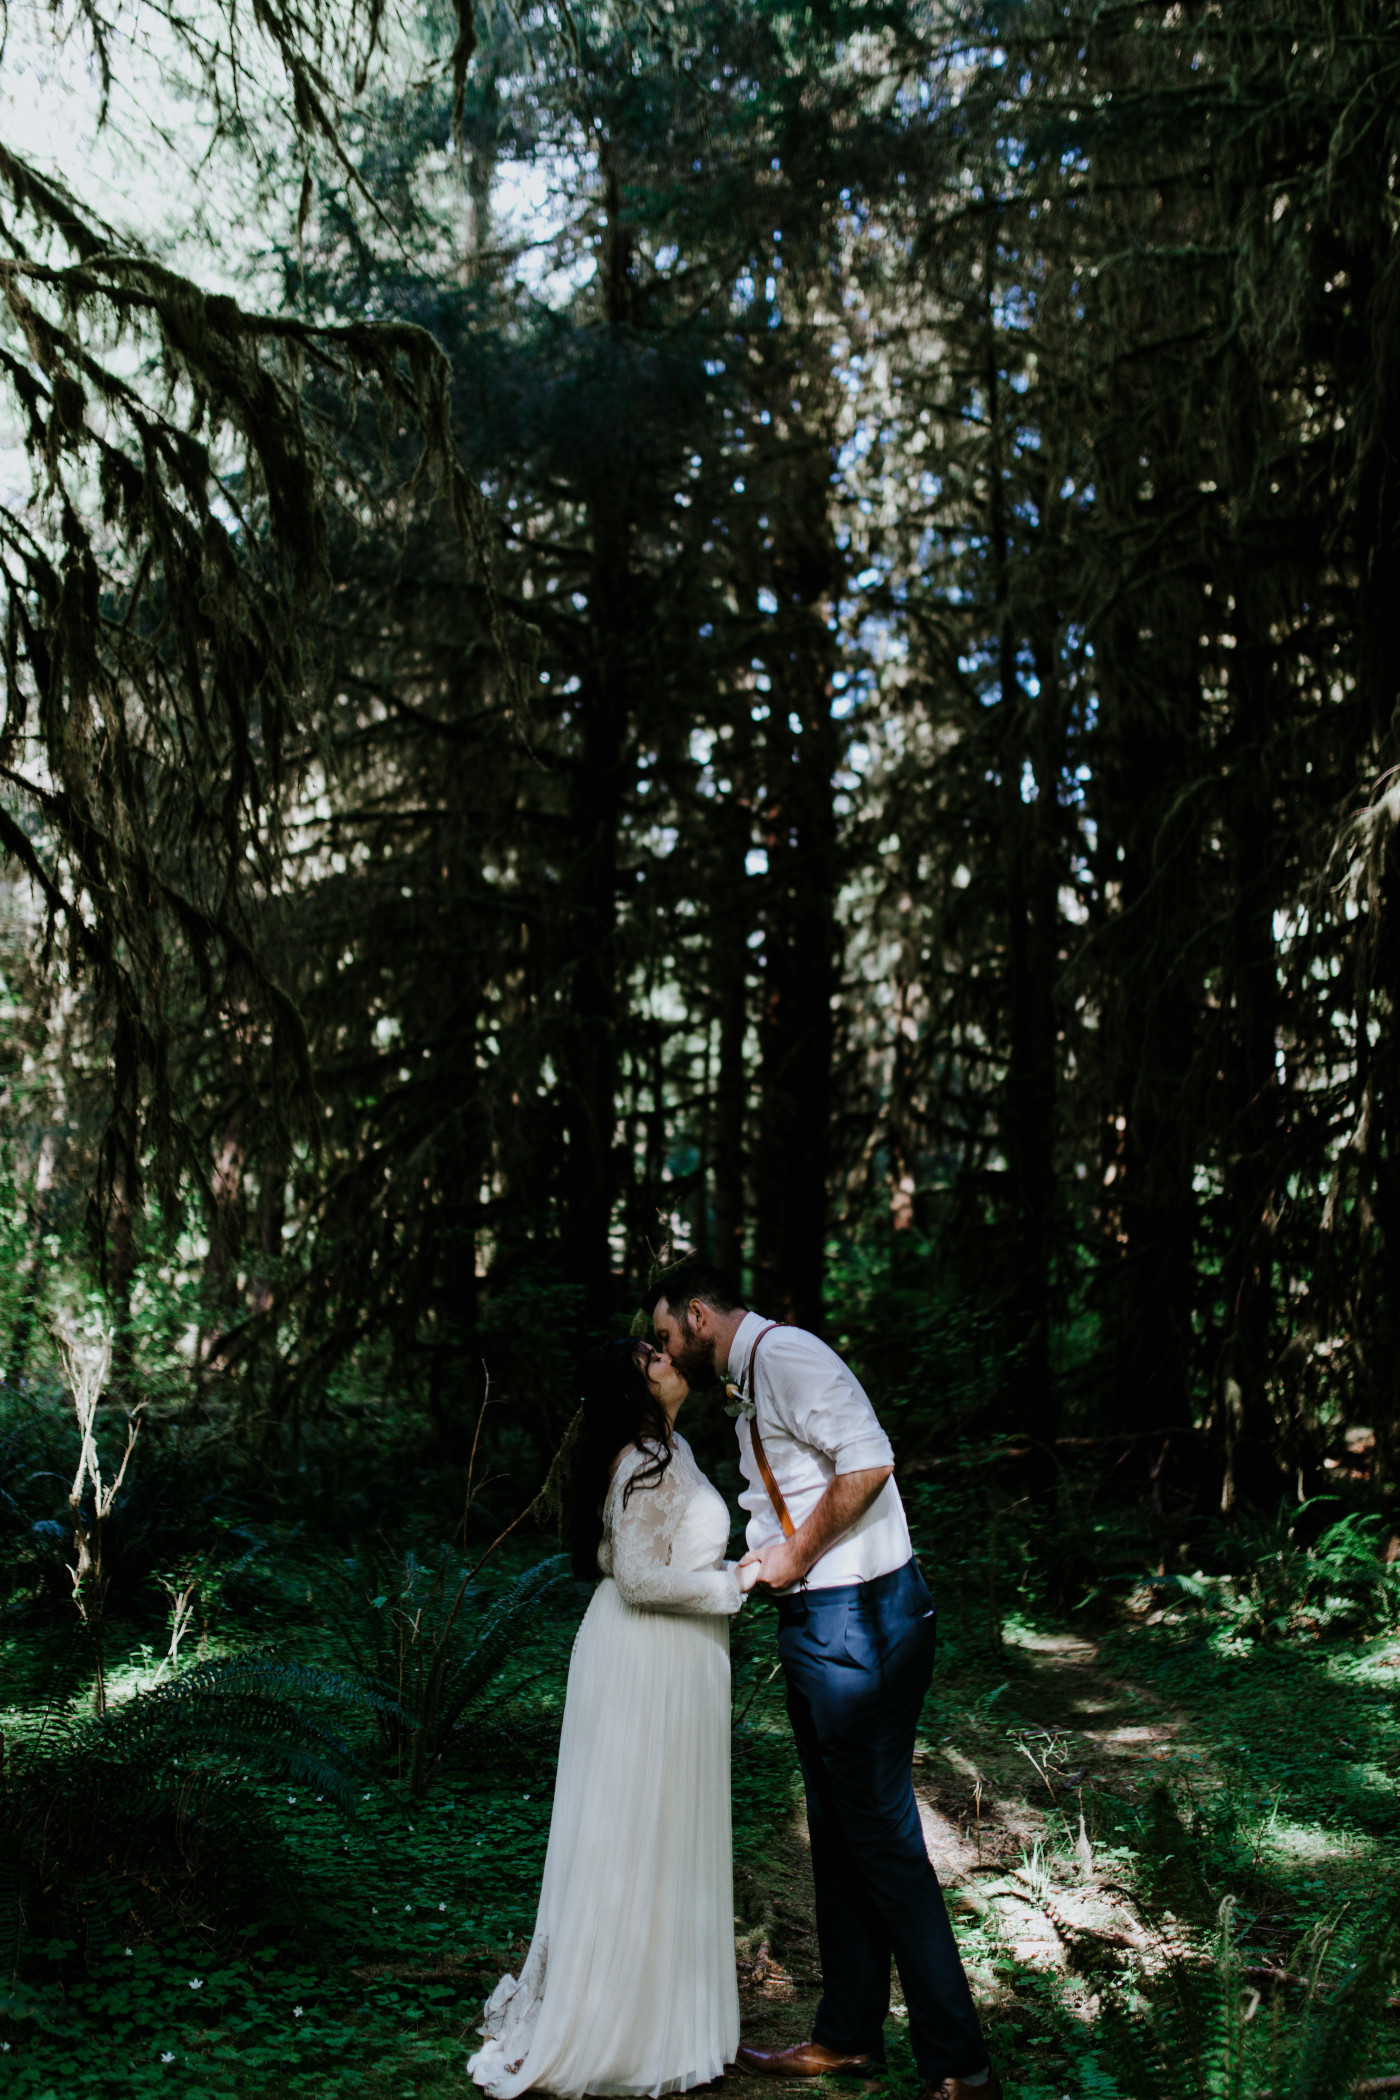 Jack and Brooke admire their rings. Elopement photography at Olympic National Park by Sienna Plus Josh.